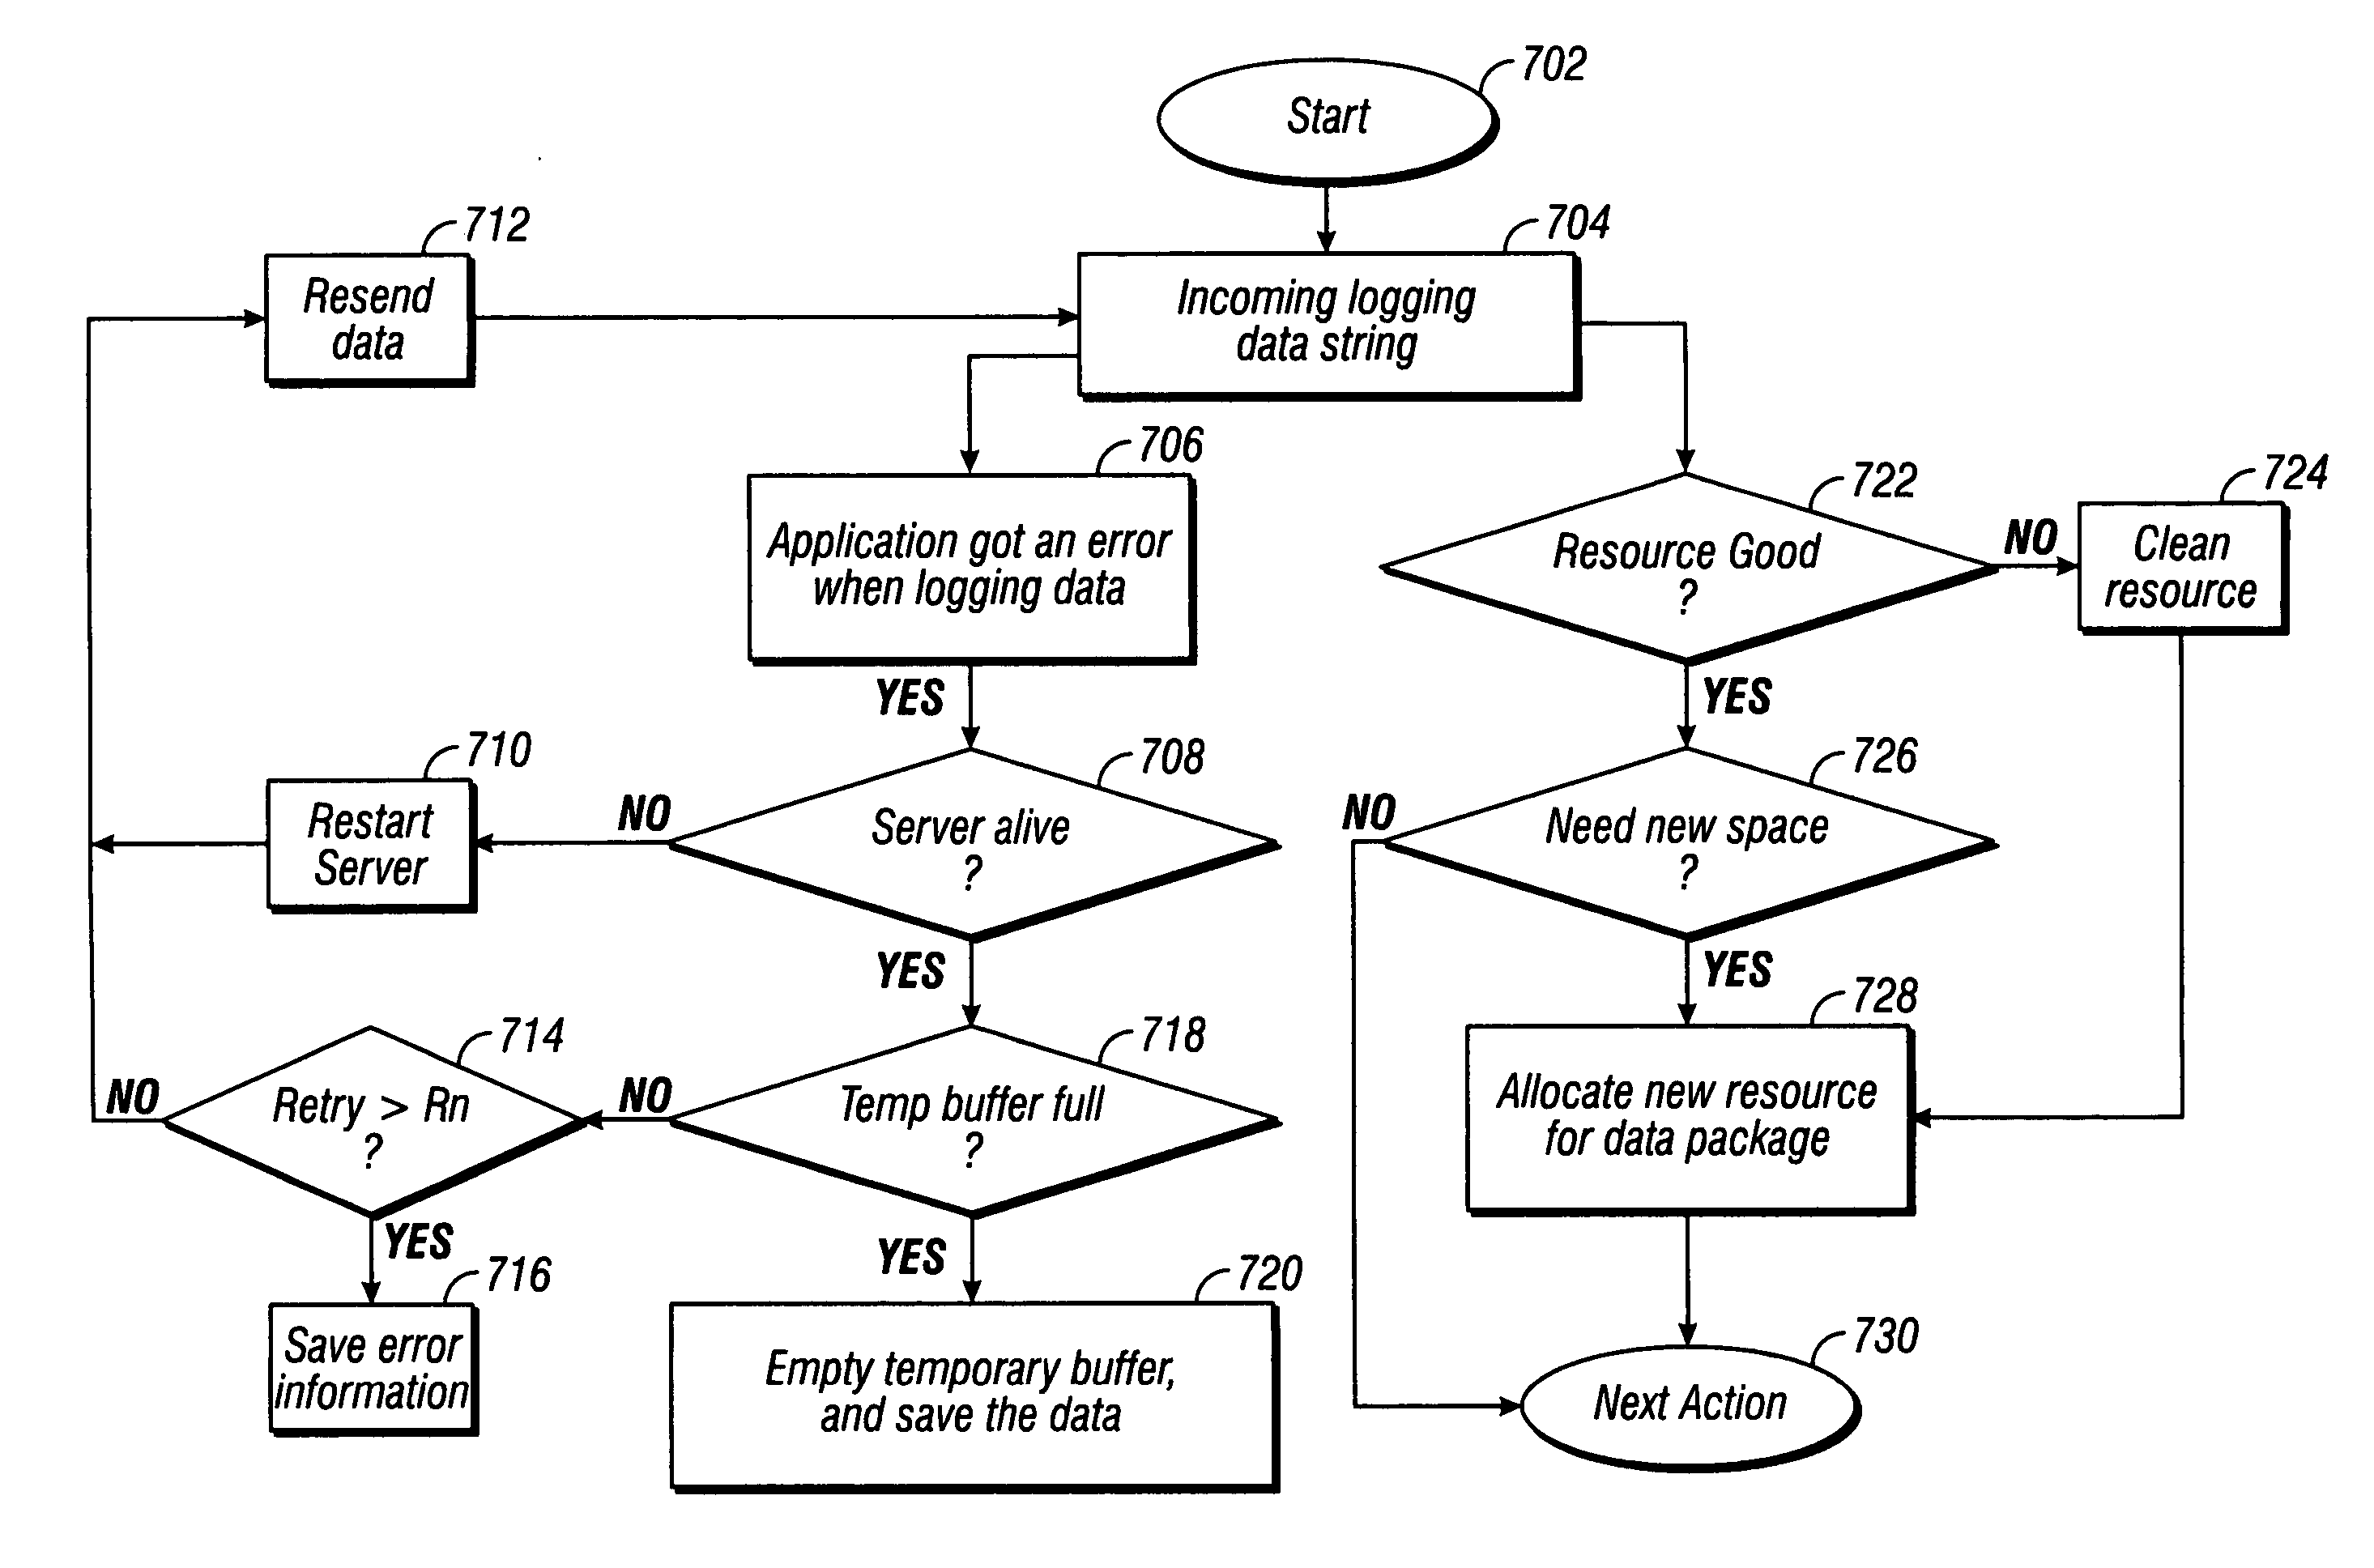 Parsing computer system logging information collected by common logging